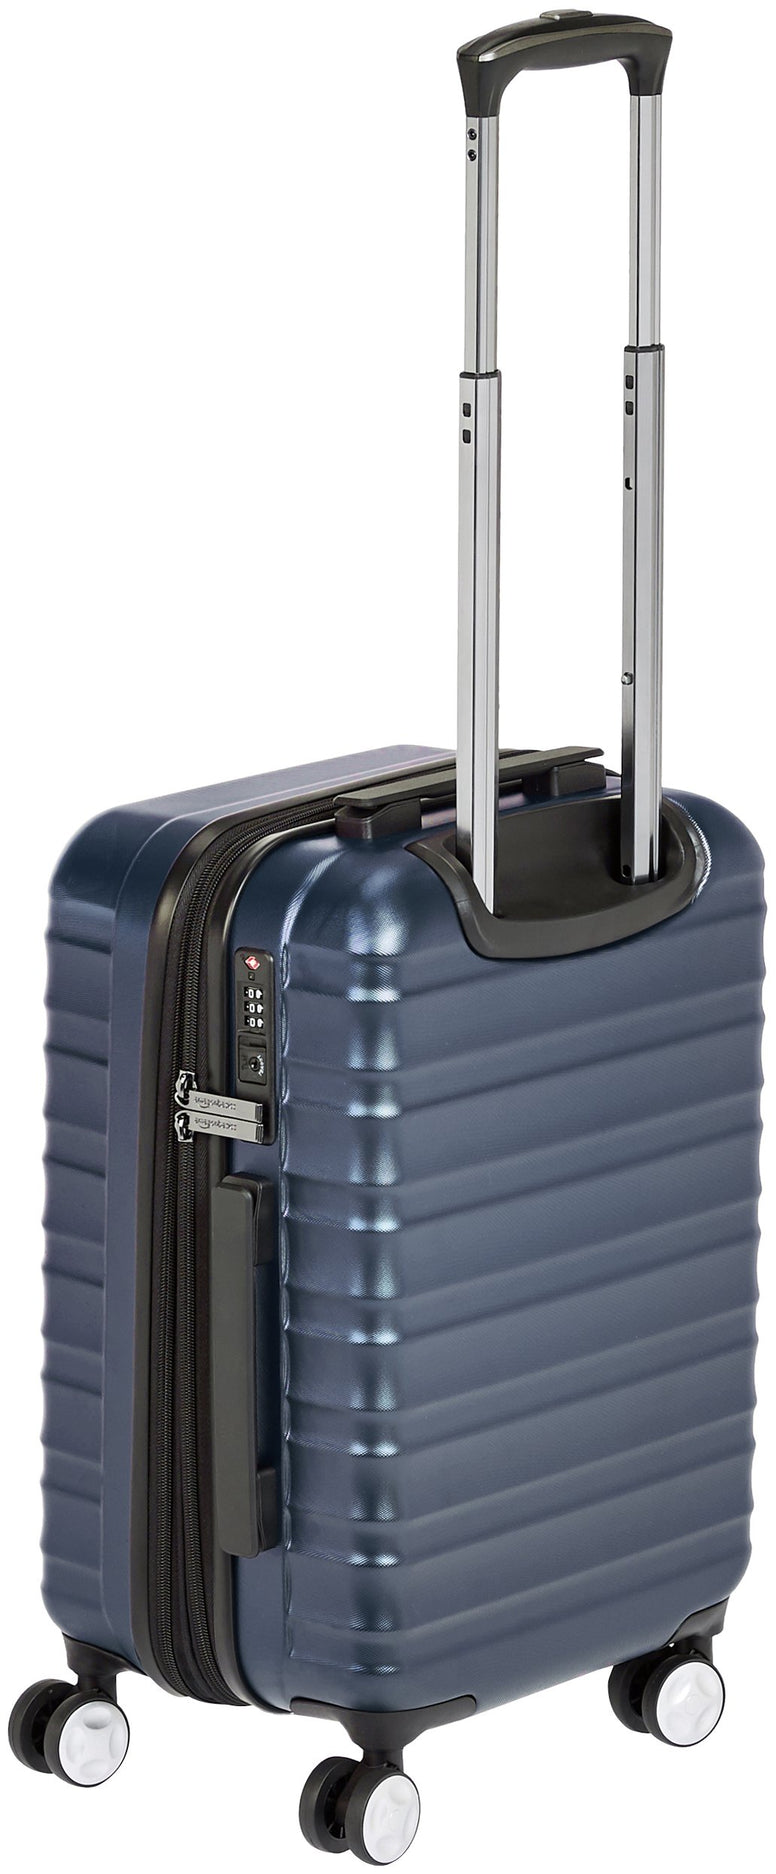 Basics Carry on Hardside Spinner with TSA Lock - 21-Inch (Material: Polycarbonate), Navy Blue